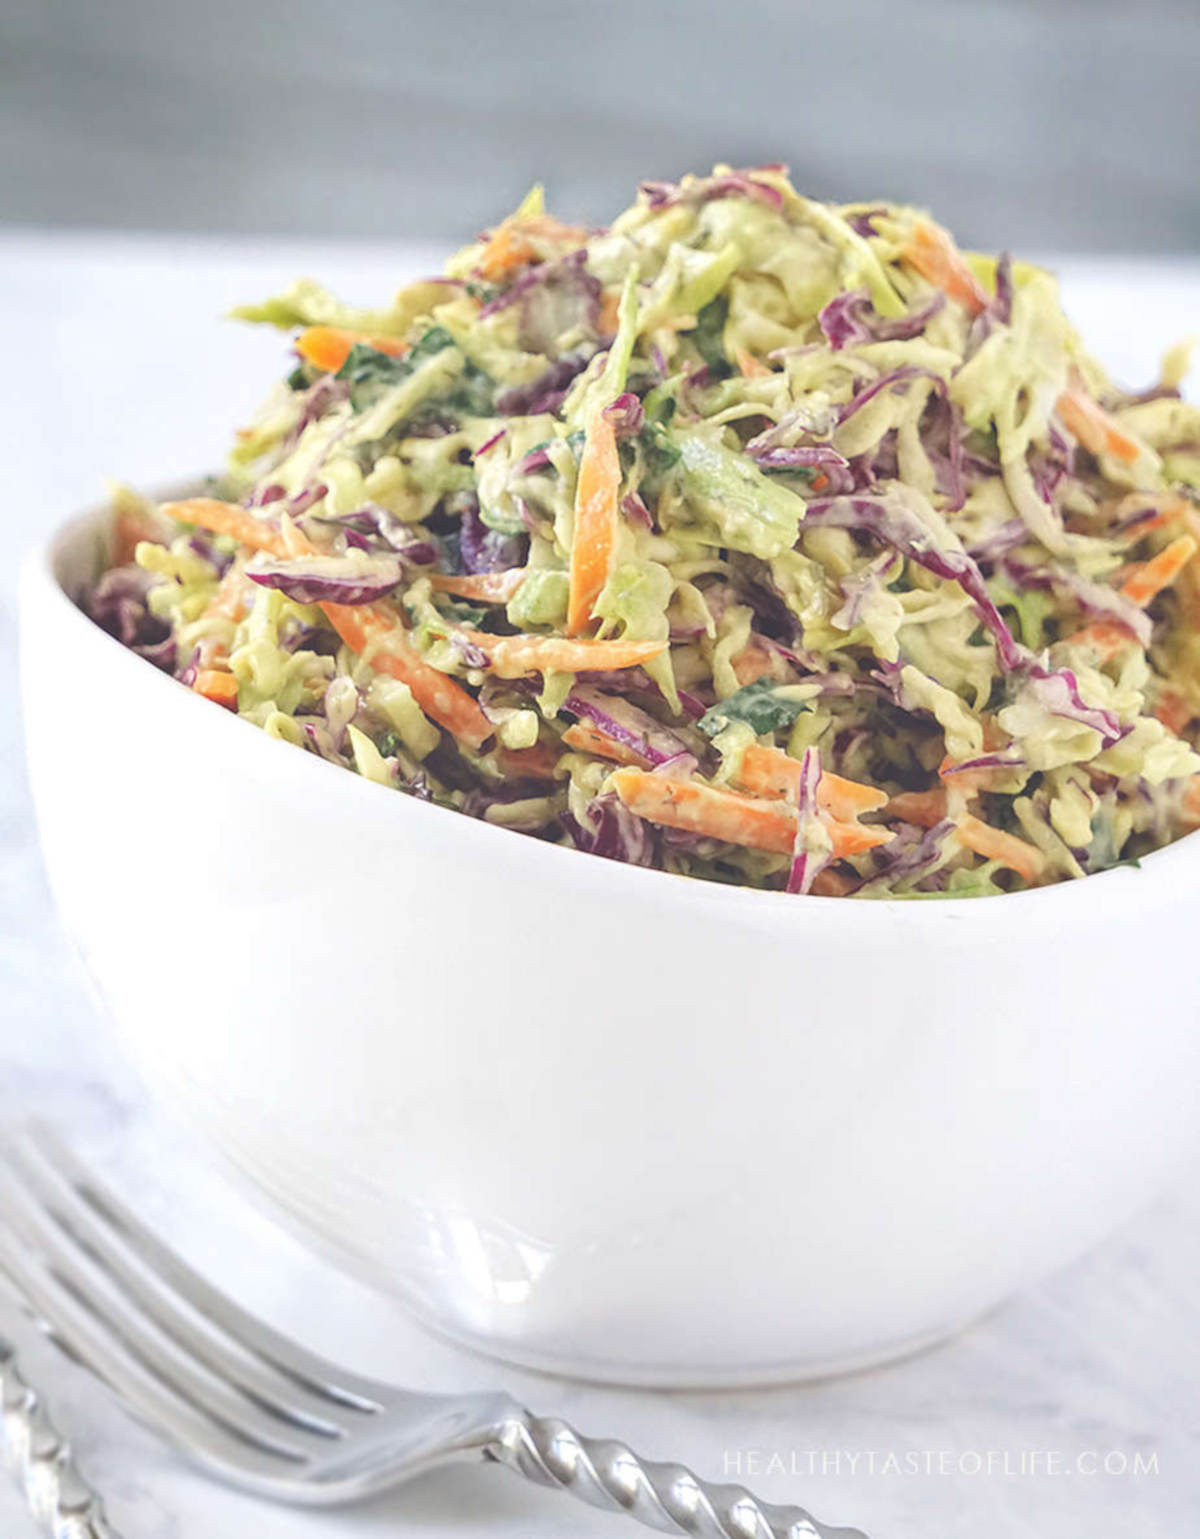 Healthy avocado coleslaw with purple and green cabbage in a bowl.